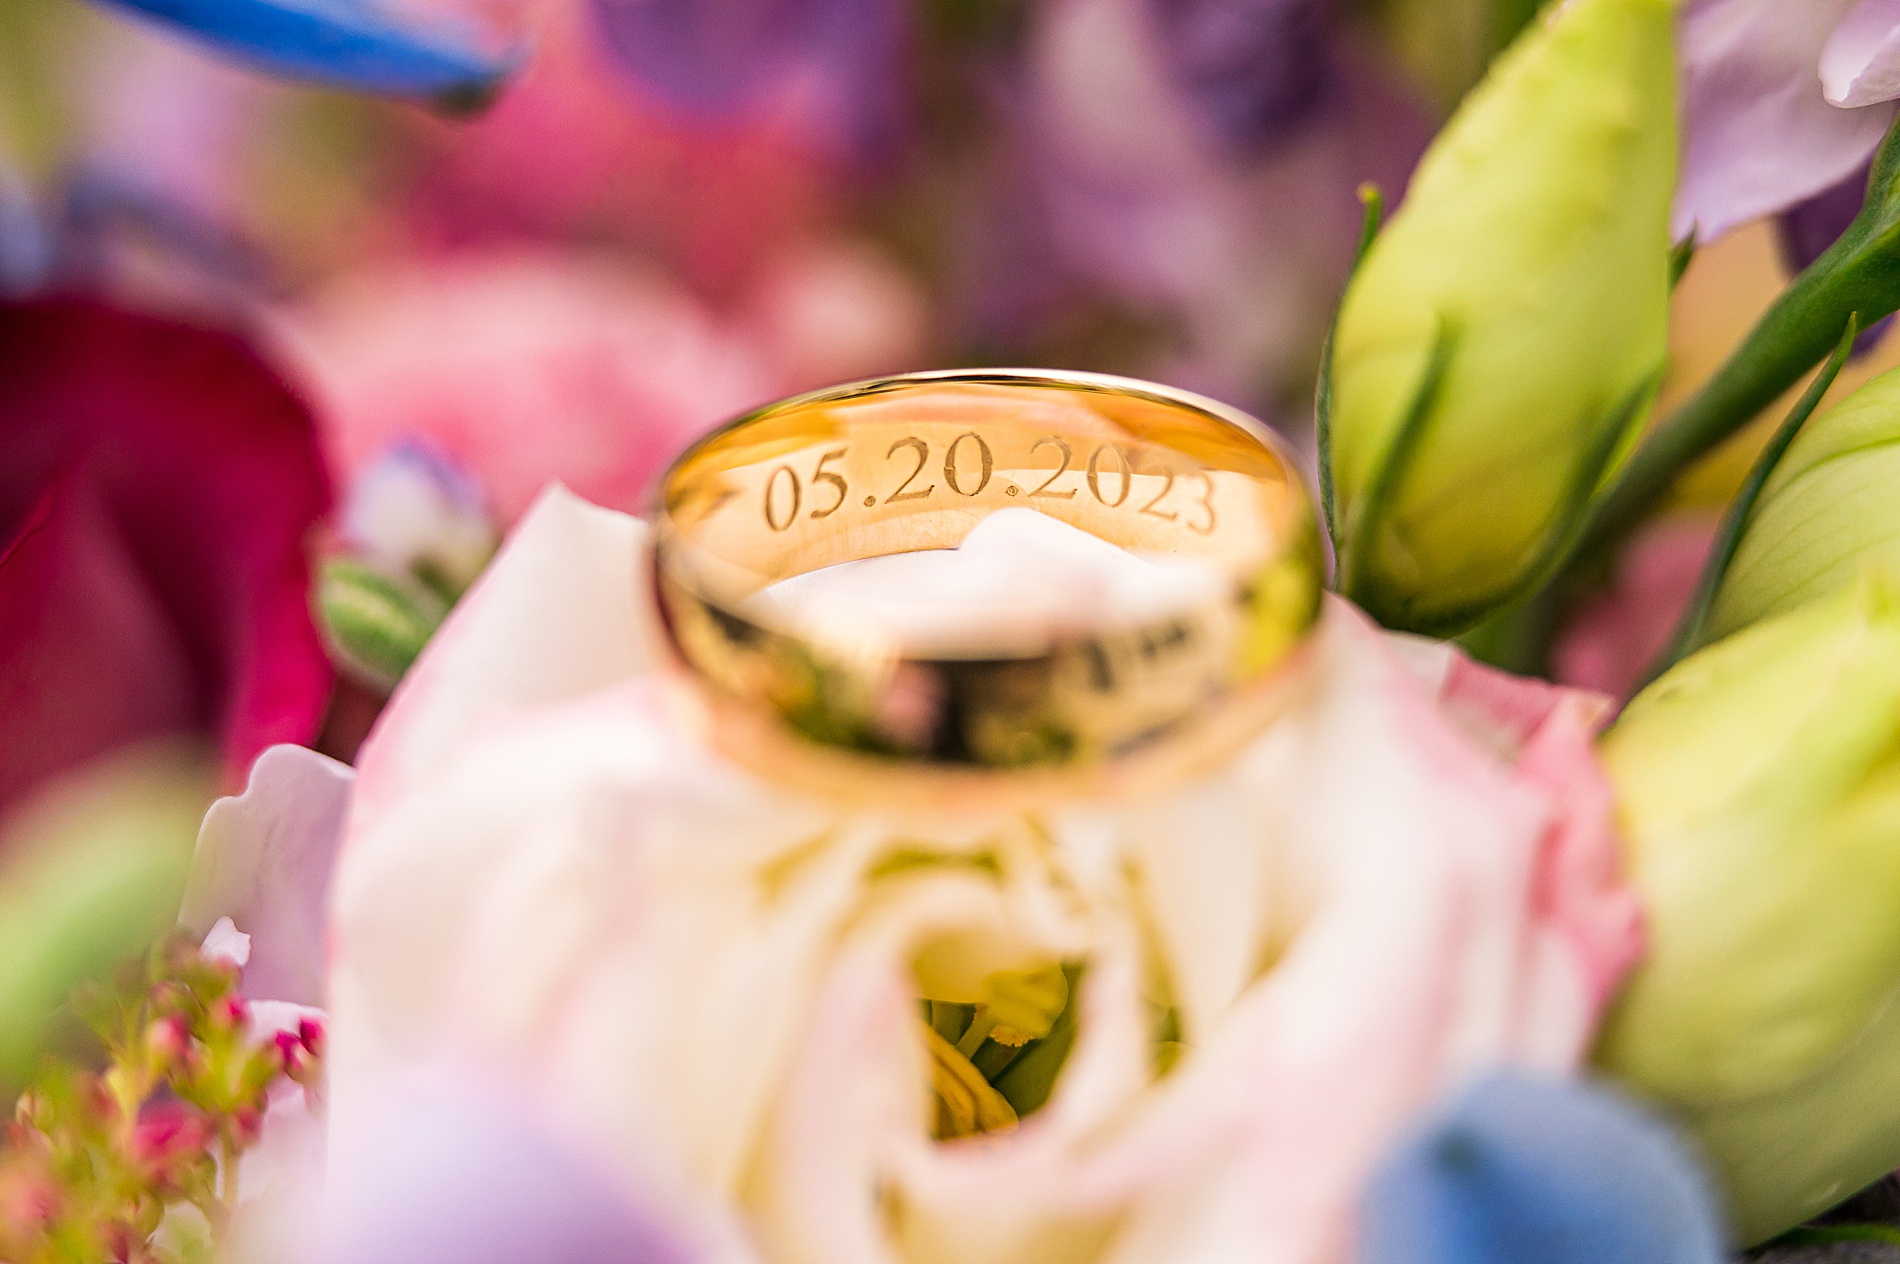 groom's wedding ring with engraved date